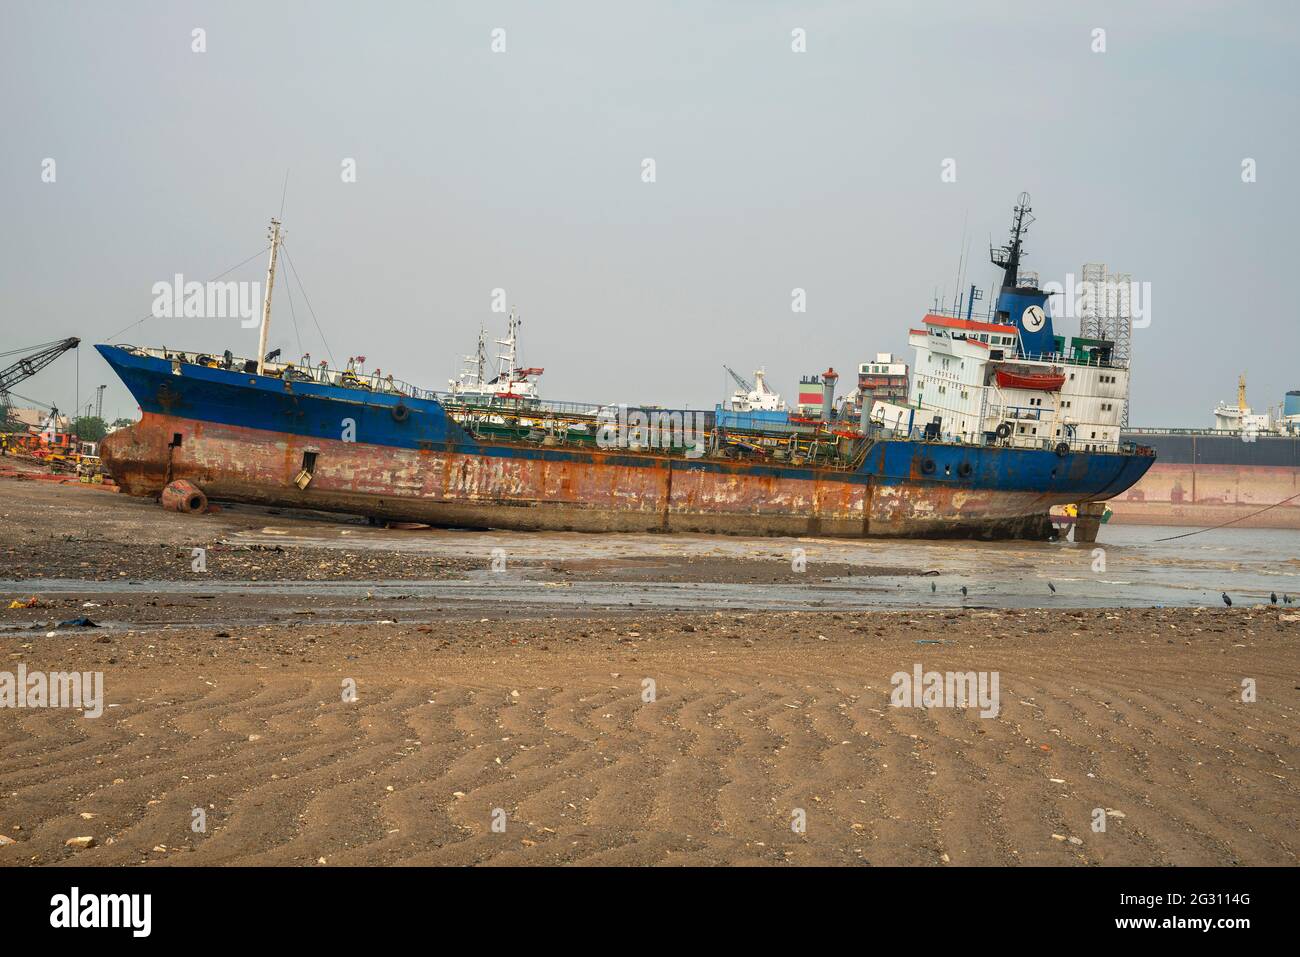 Alang ,01, February,2016: All types of ships,and boats are brought to Alang Ship Breaking Yard for scrapping and salvage,Bhavnagar ,Gujarat.India Stock Photo